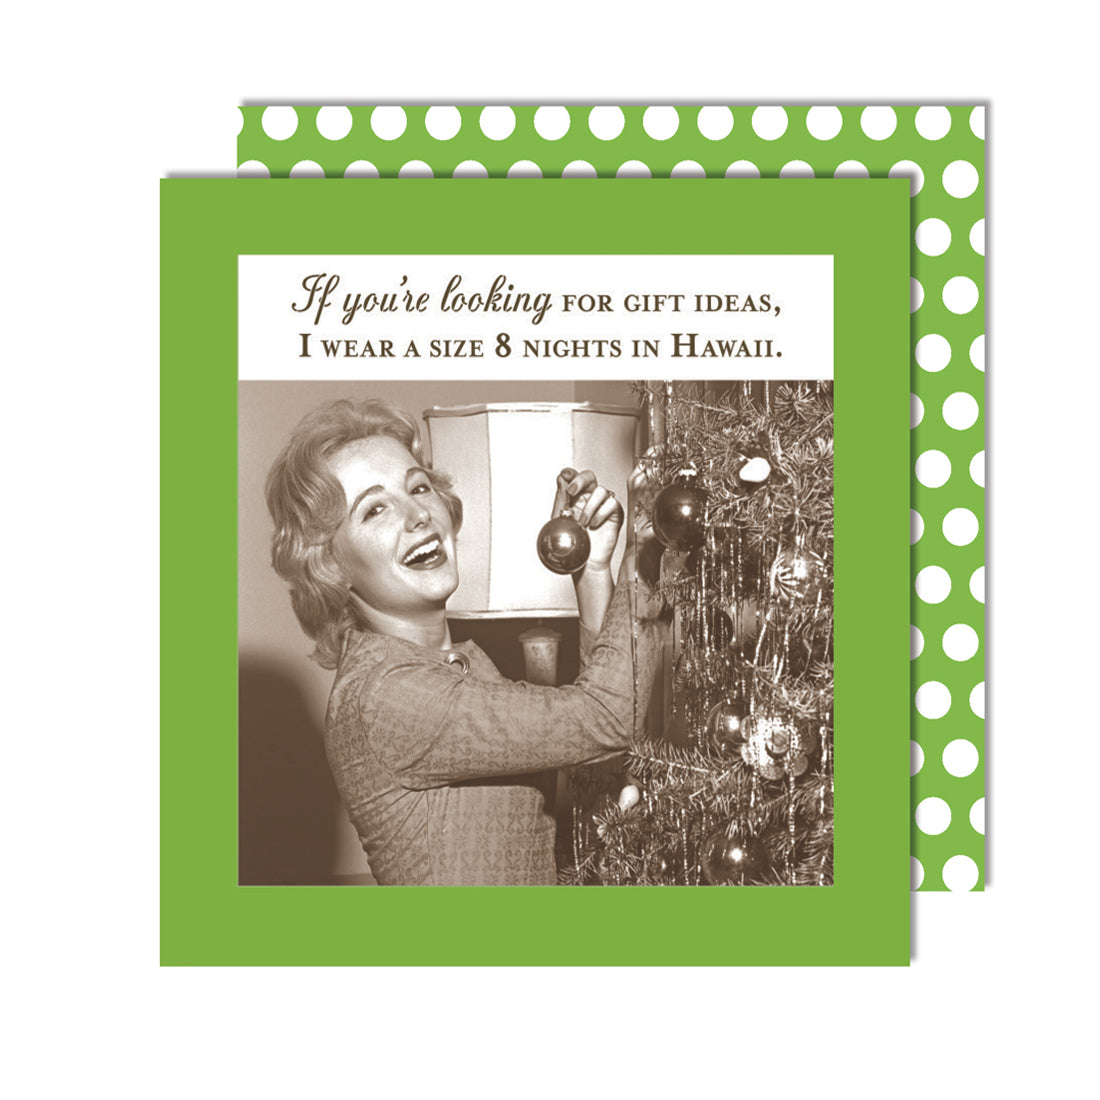 Looking for Gift Ideas Funny Christmas Cocktail Napkins